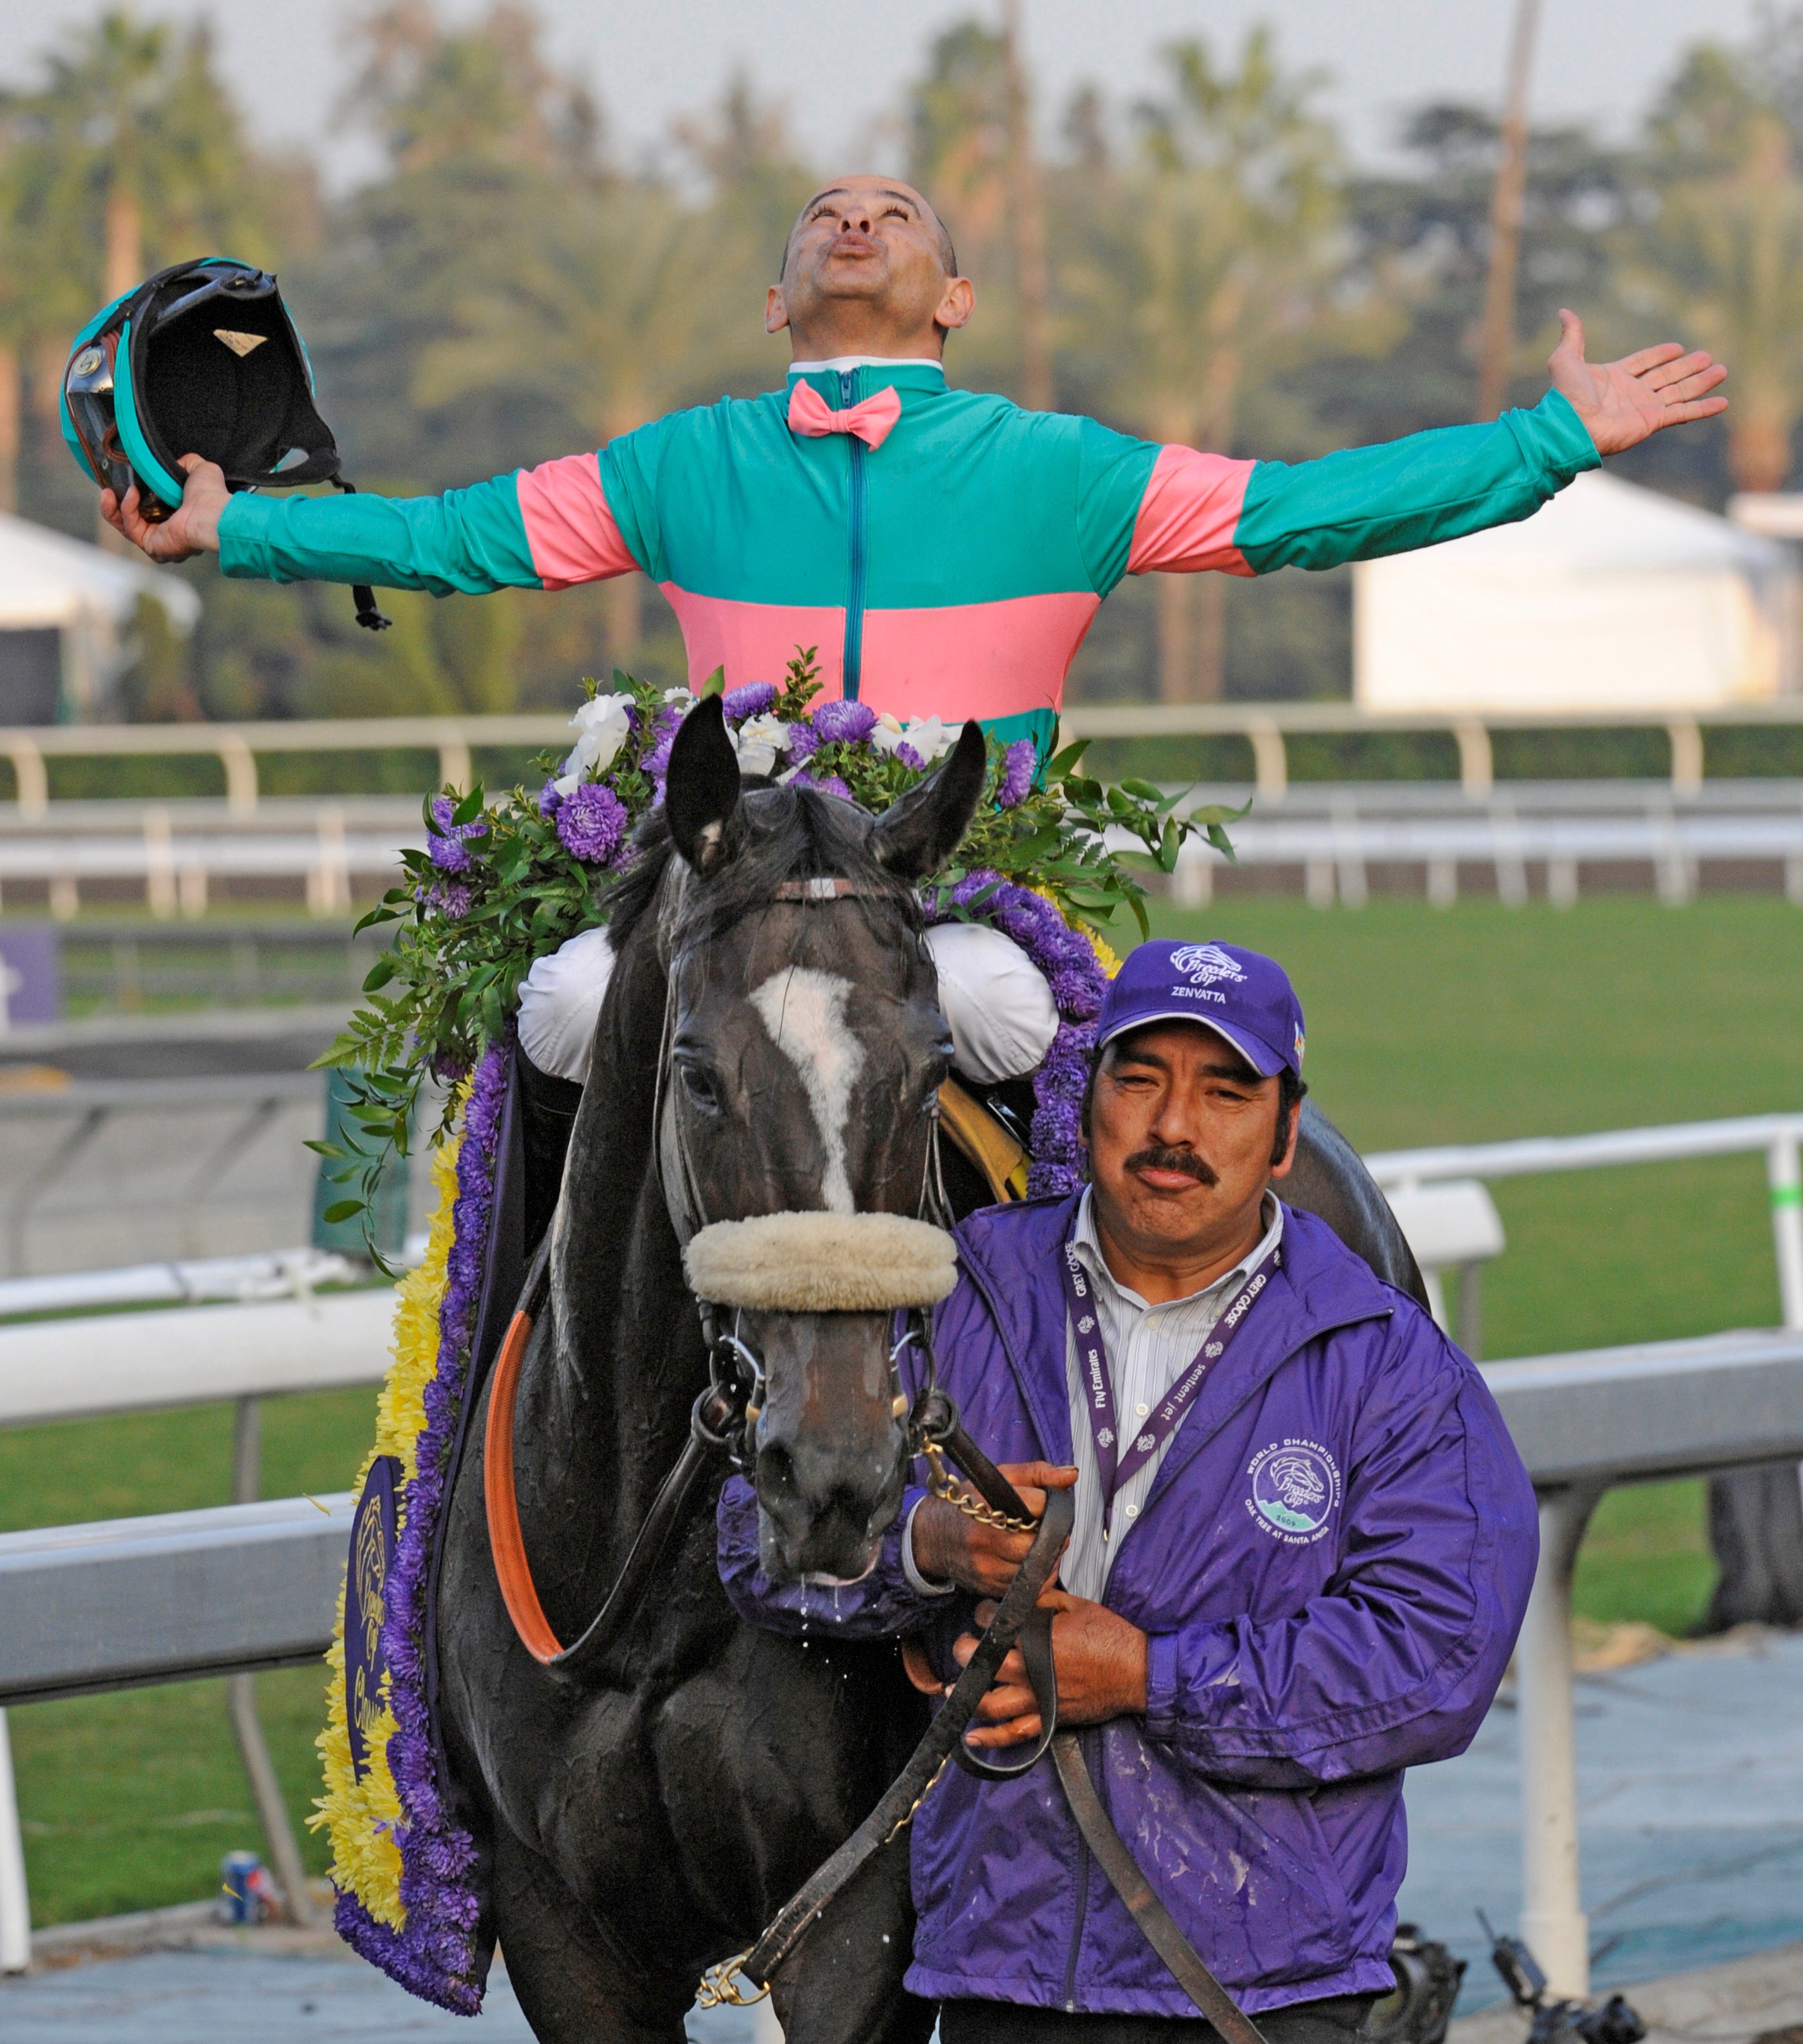 Zenyatta (Mike Smith up) after winning the 2009 Breeders' Cup Classic at Santa Anita (Skip Dickstein)